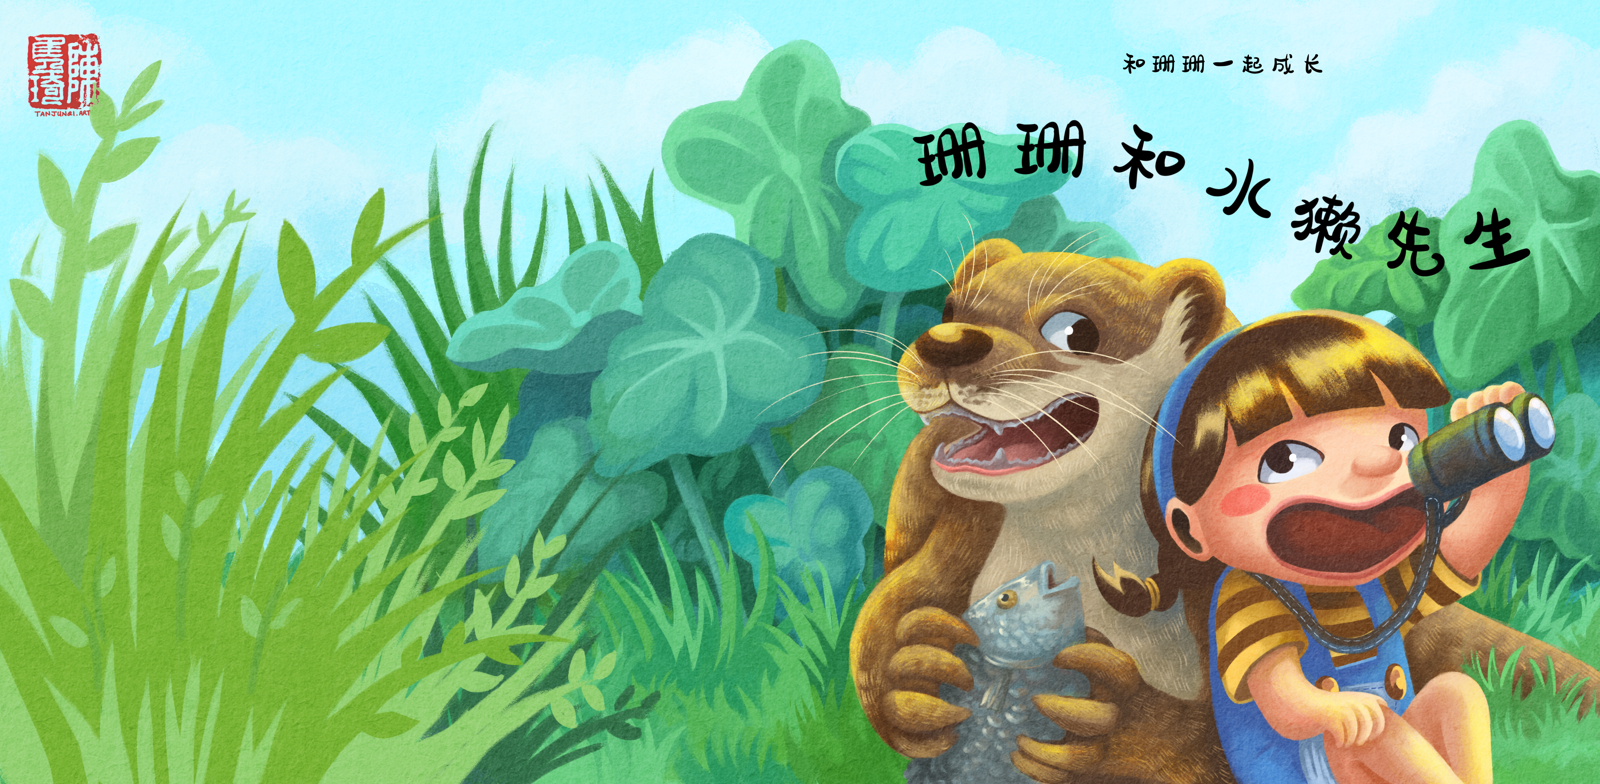 Book cover design (chinese version) of the second book in the series, Shan Shan and Mr. Otter. It shows Shan Shan and Mr. Otter sitting side-by-side on the front cover, beneath the title. Shan Shan is holding a pair of binoculars in front of her face and looking at Mr. Otter out of the corner of her eye. Mr. Otter is holding a scaly fish in his paws and is looking at Shan Shan out of the corner of his eyes. They are sitting in a park lush with vegetation.